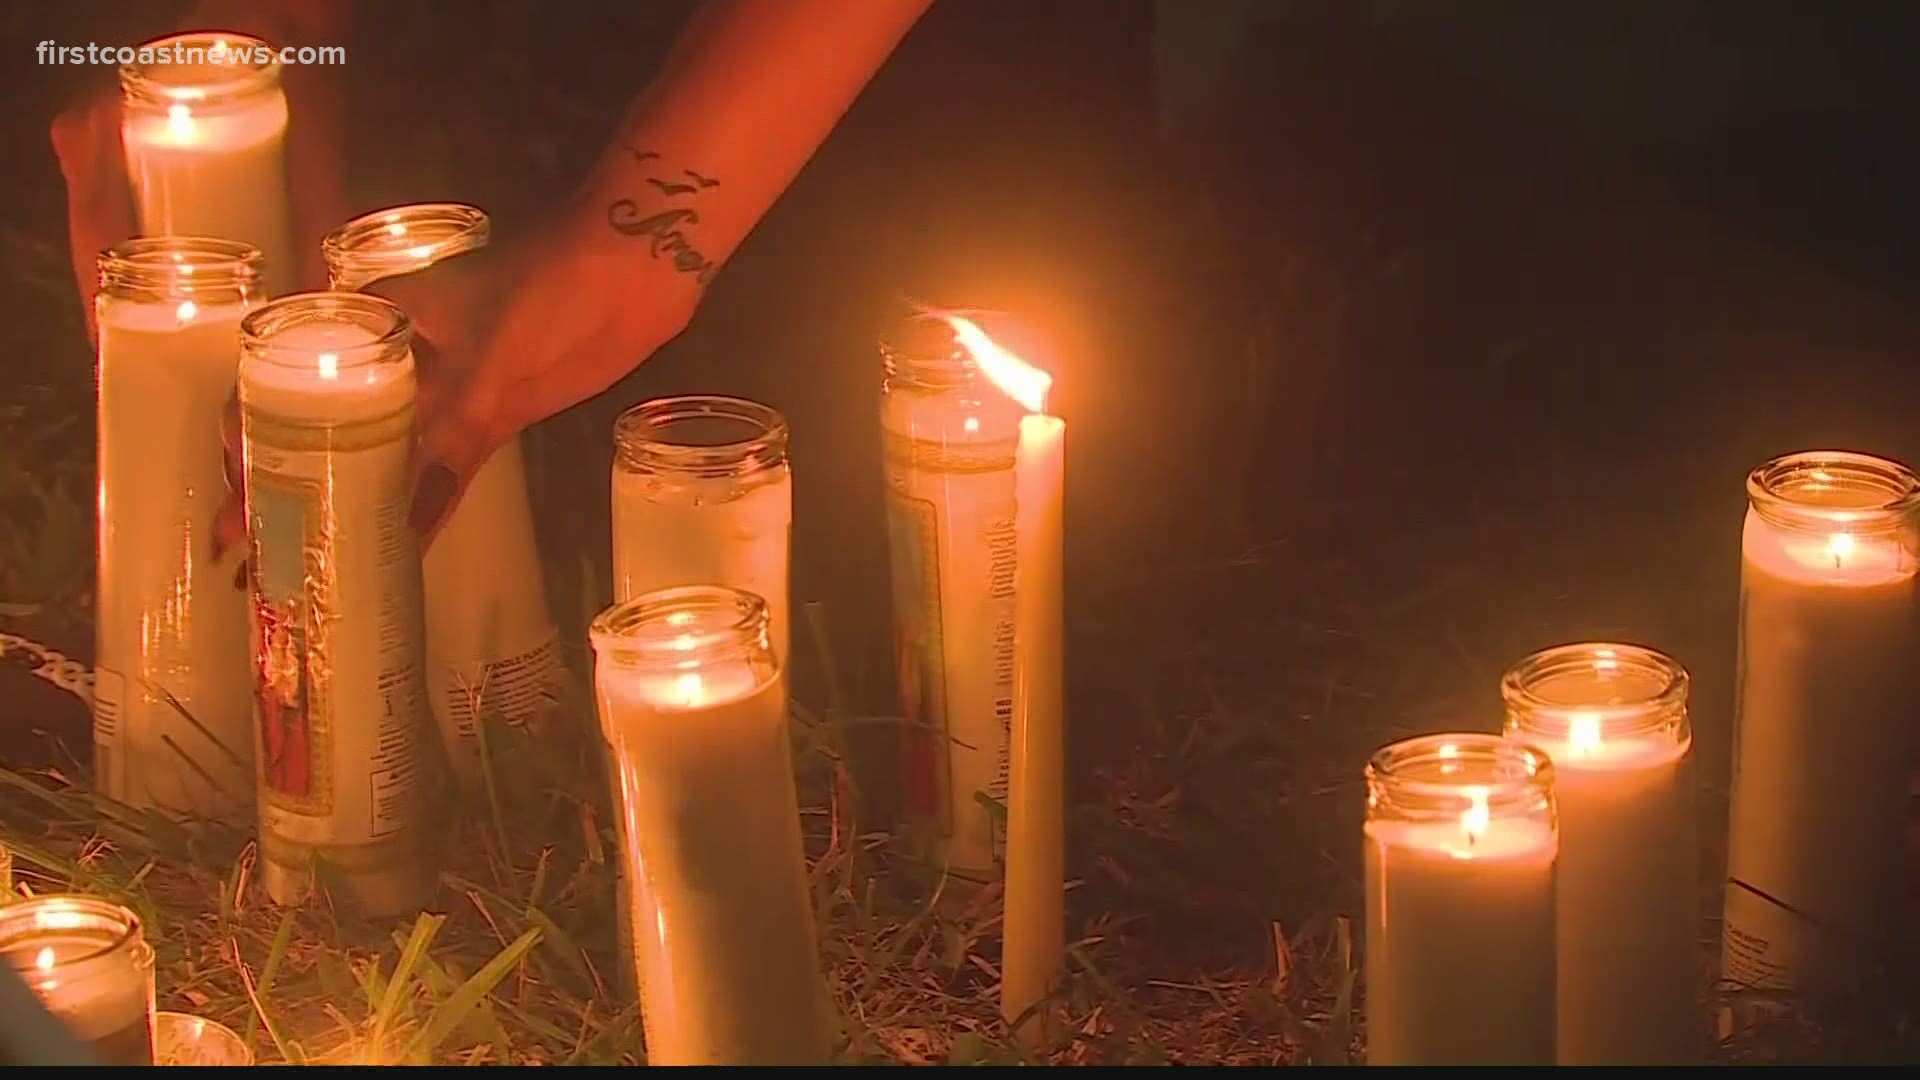 Friends of the couple held a vigil for one of the victims on what would have been his 22nd birthday.